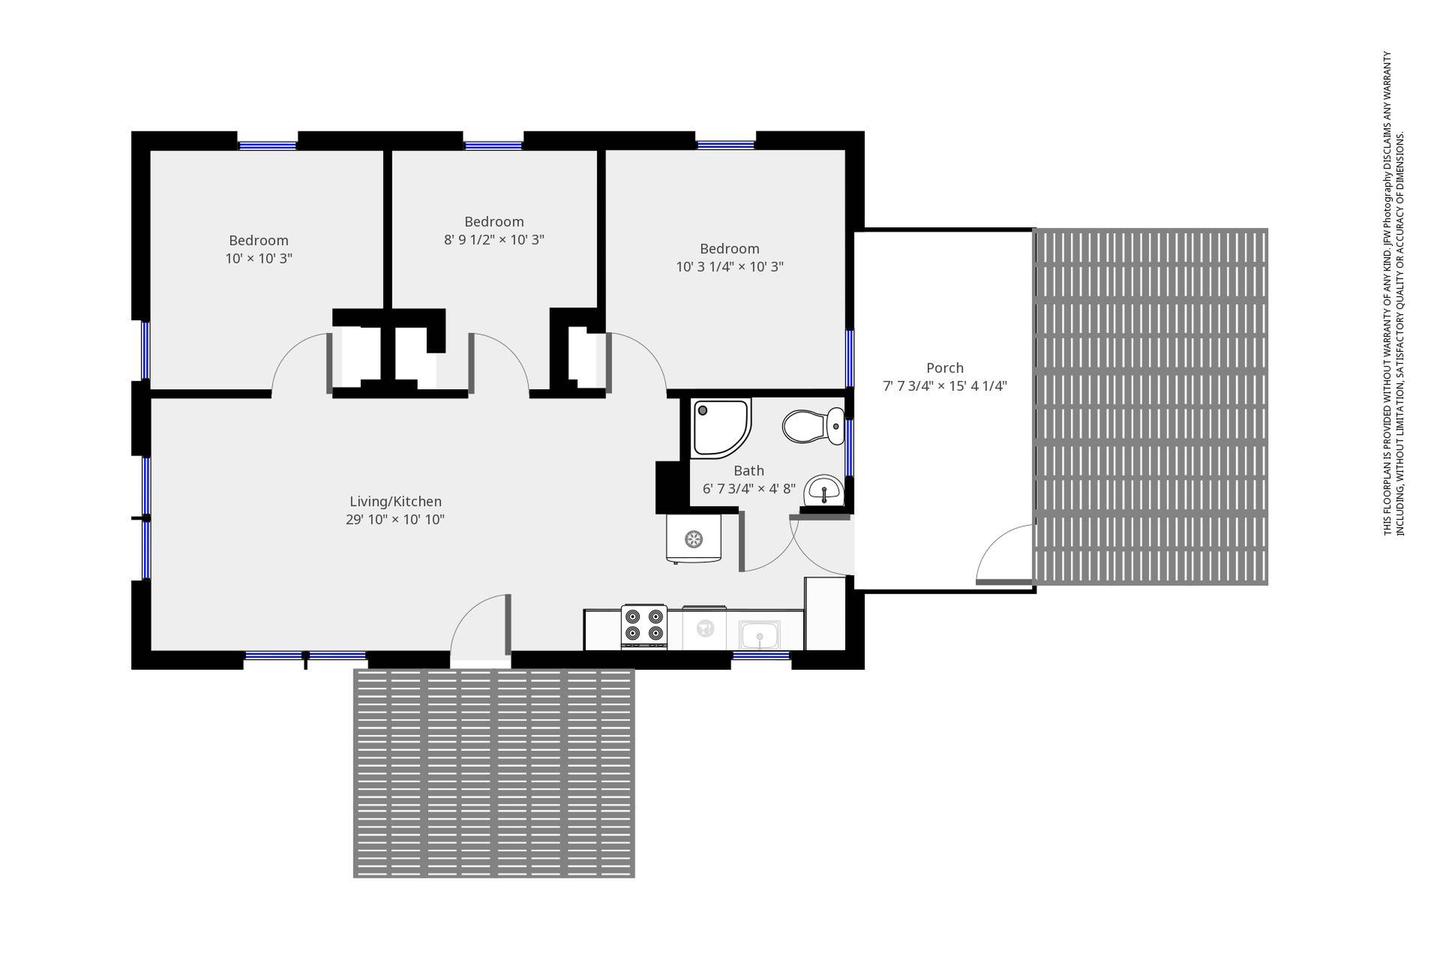 Bay View House offers a spacious floor plan for guests